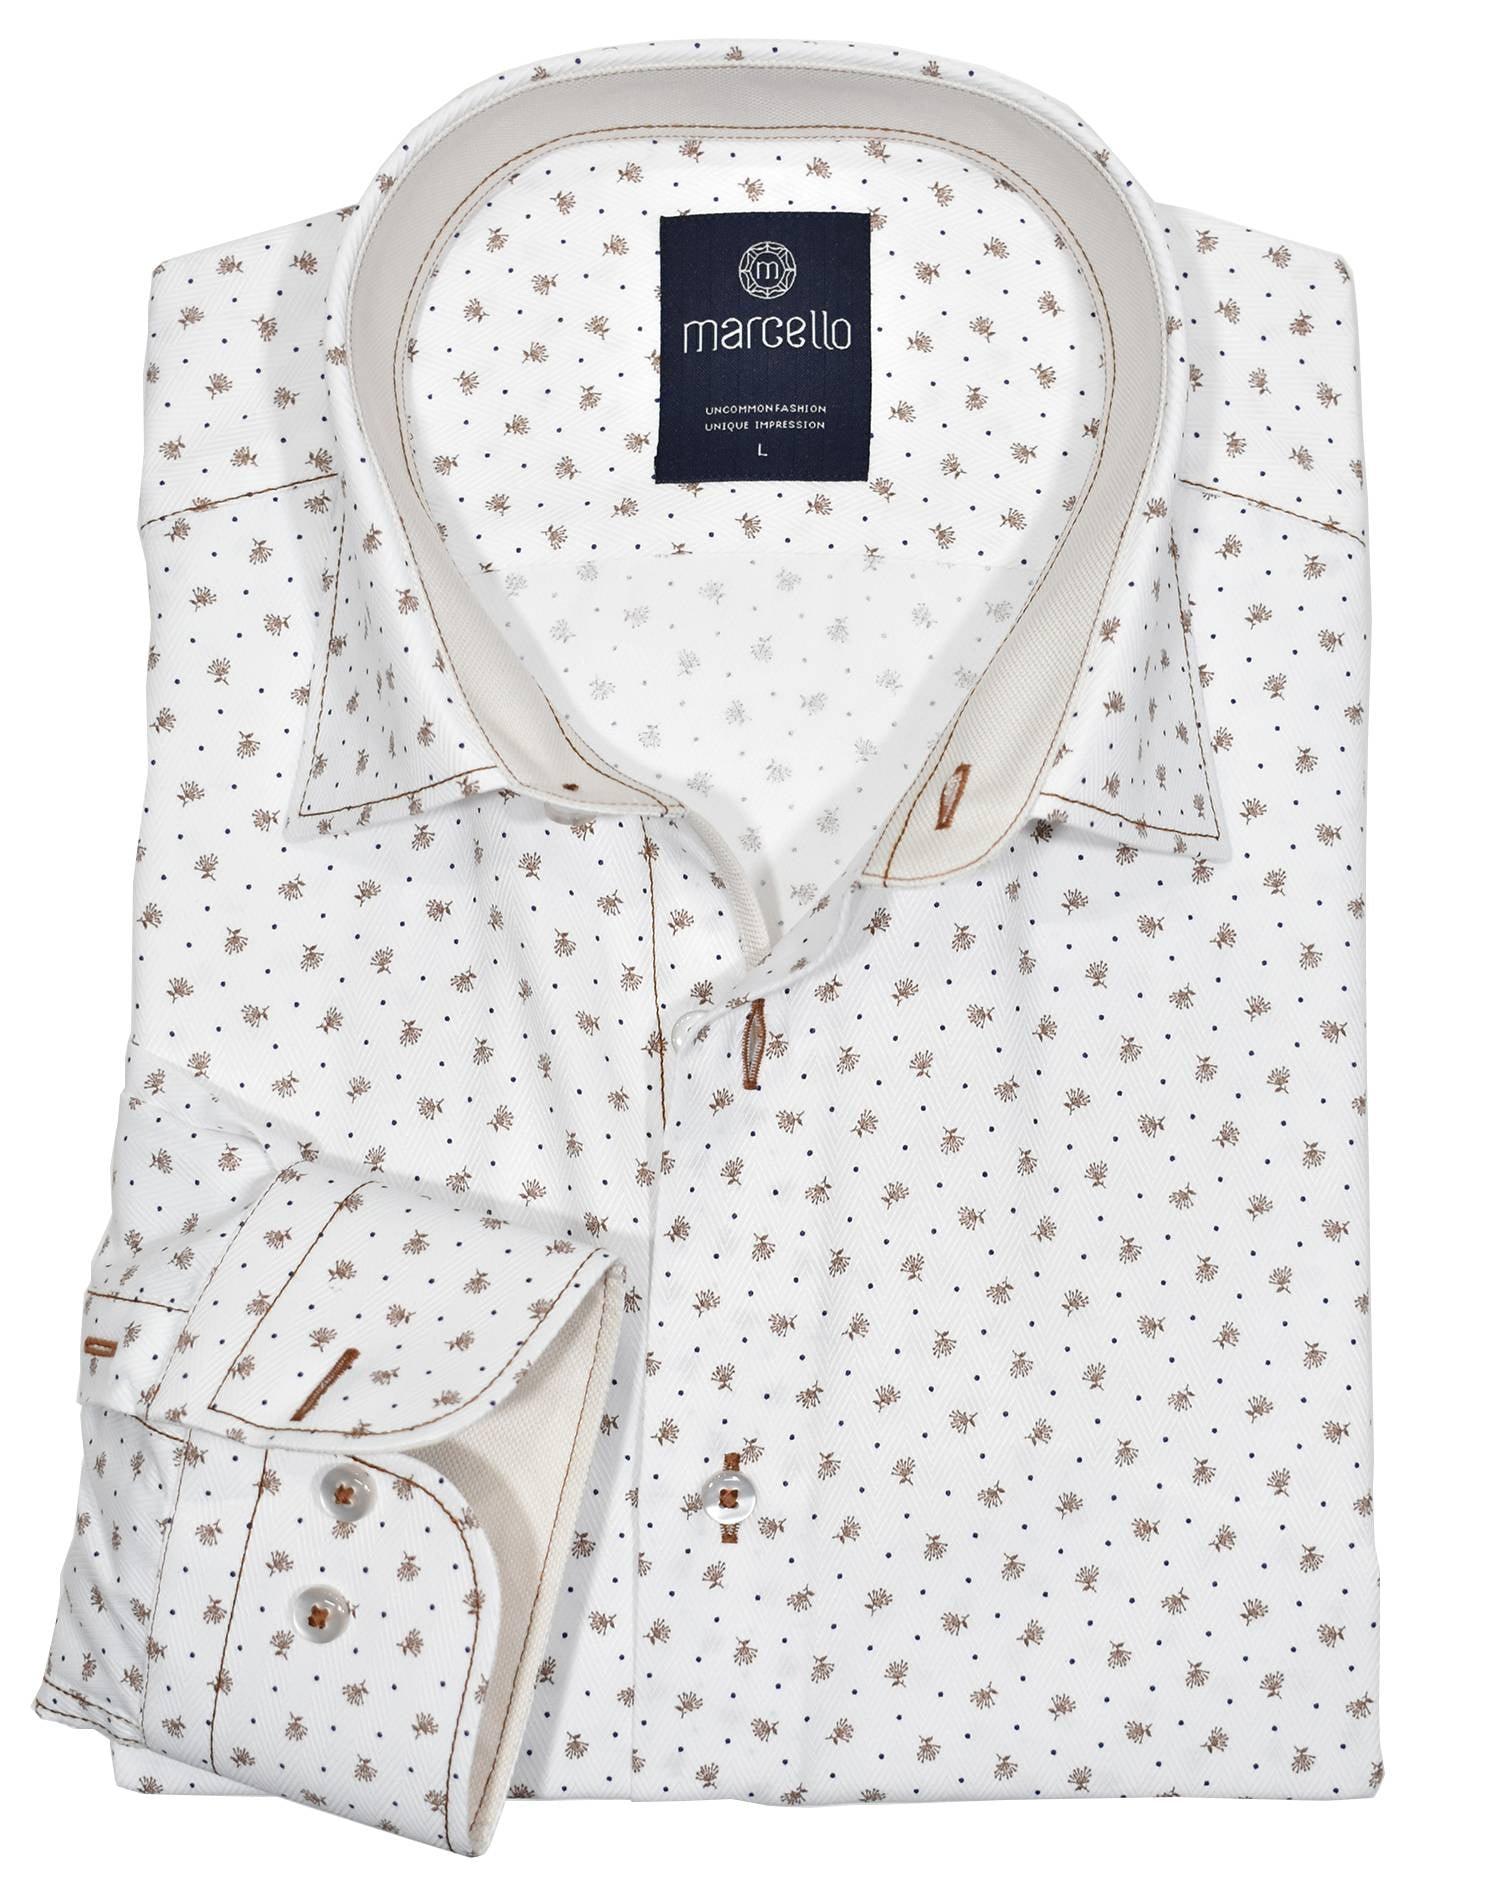 Ultra soft cotton. Sophisticated herringbone fabric. Contrast fashion stitch work. Custom selected buttons. 2 button signature cuffs. Classic shaped fit. Shirt by Marcello Sport.